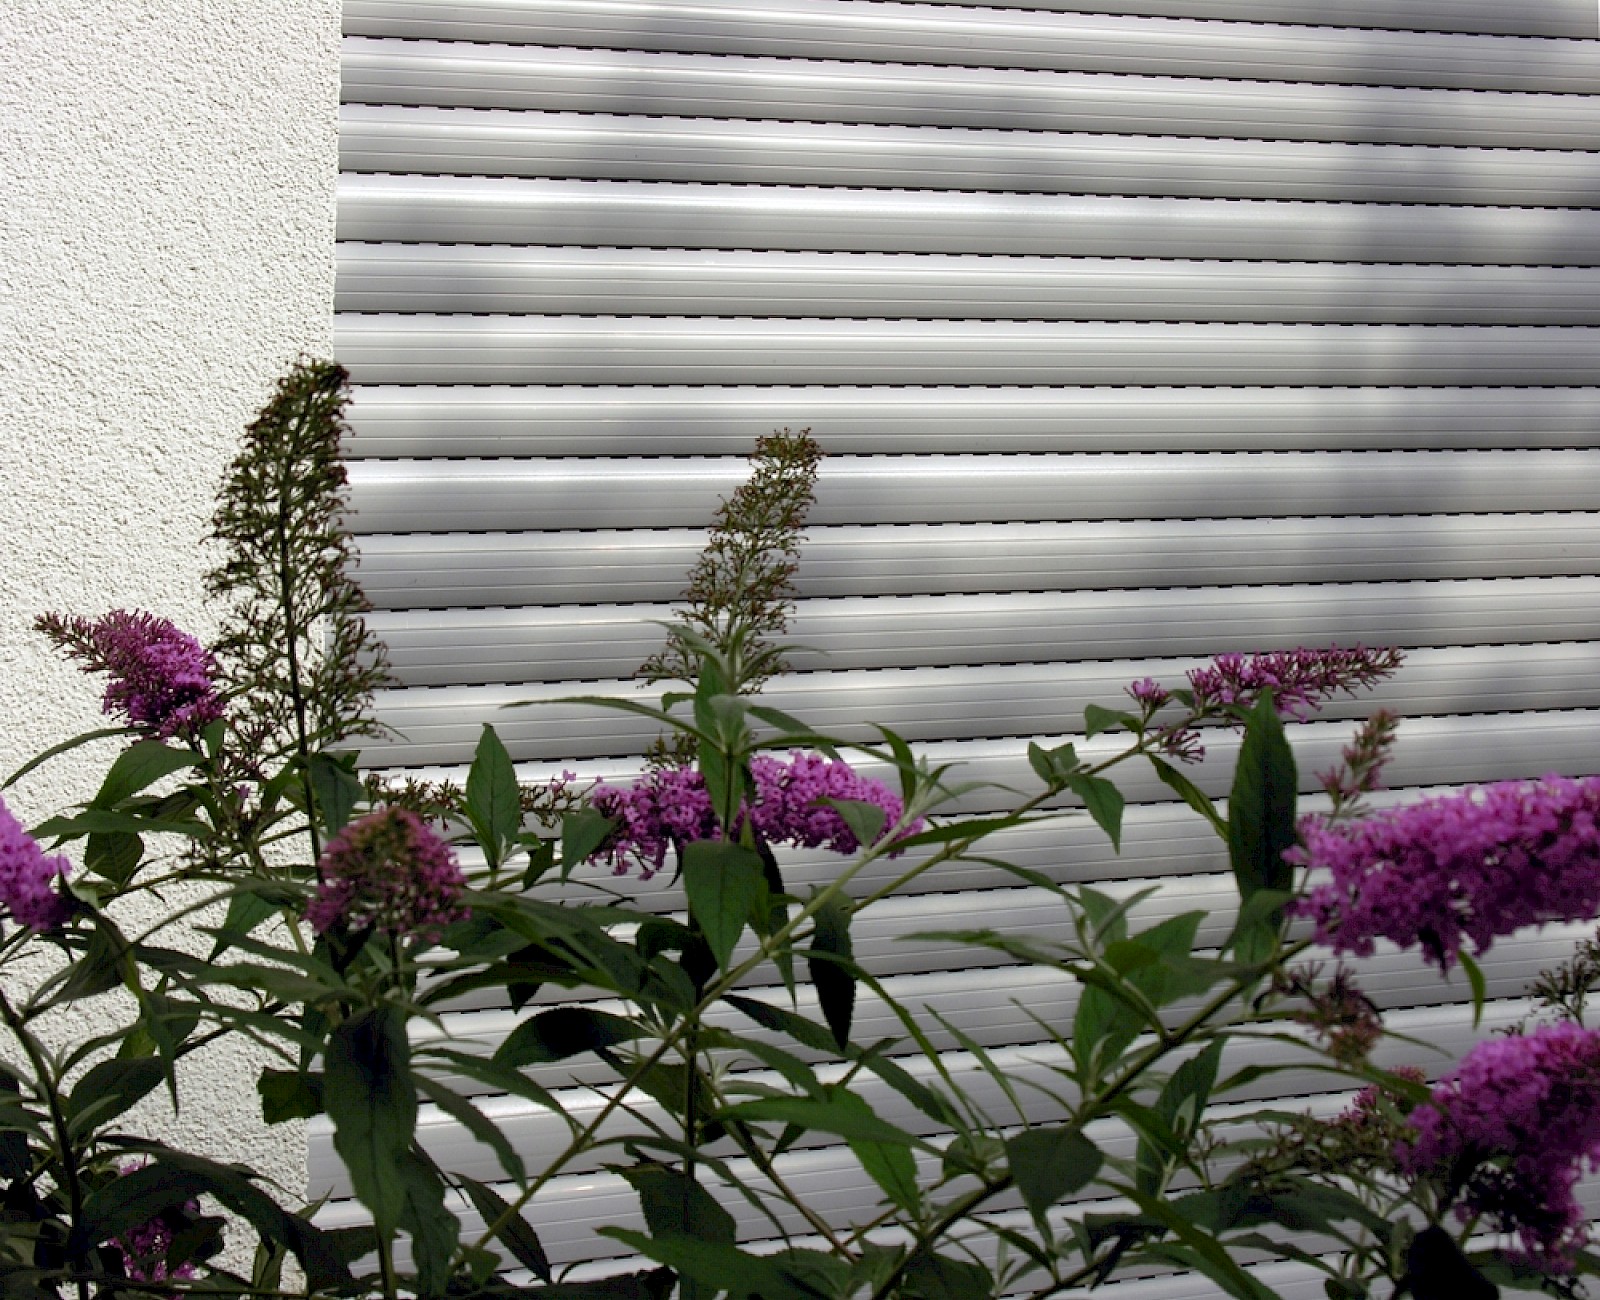 Flowers with rolling shutters